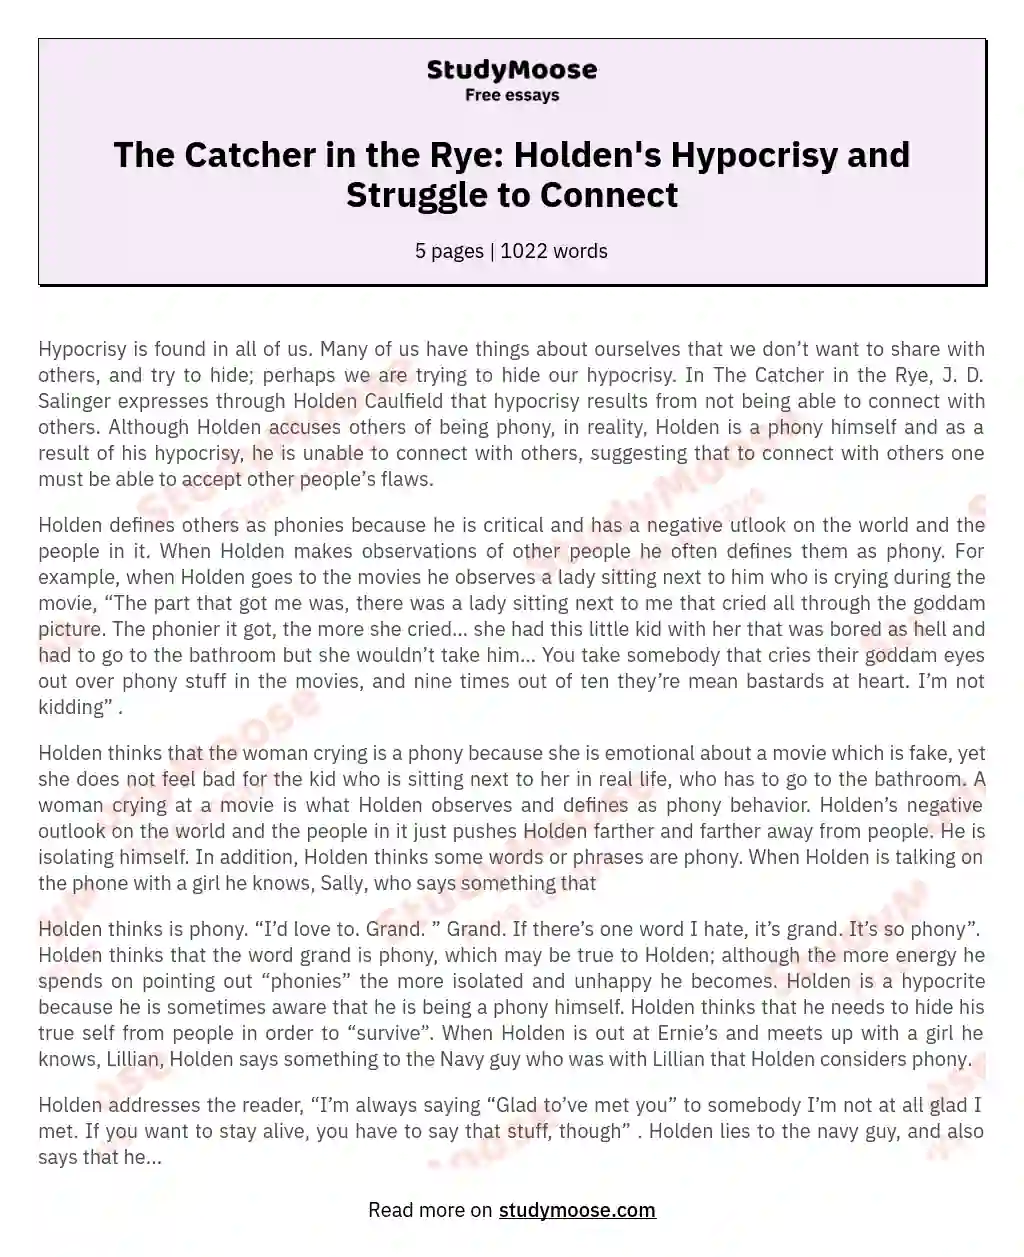 The Catcher in the Rye: Holden's Hypocrisy and Struggle to Connect essay